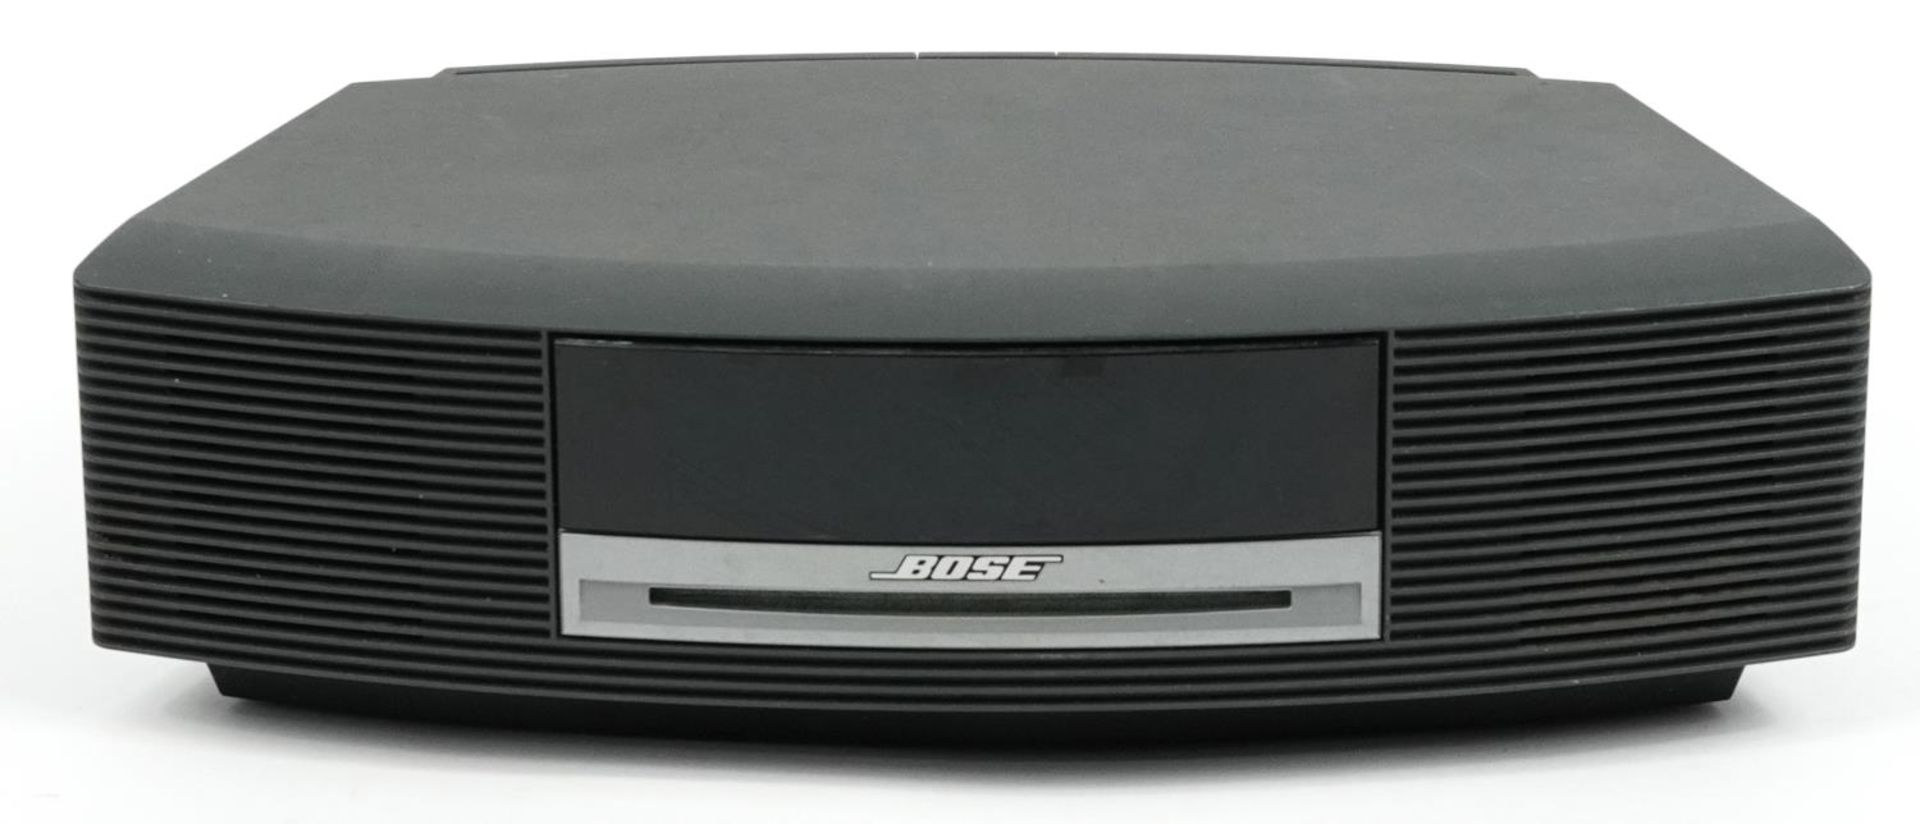 Bose Wave music system model AWRCC5 For further information on this lot please contact the